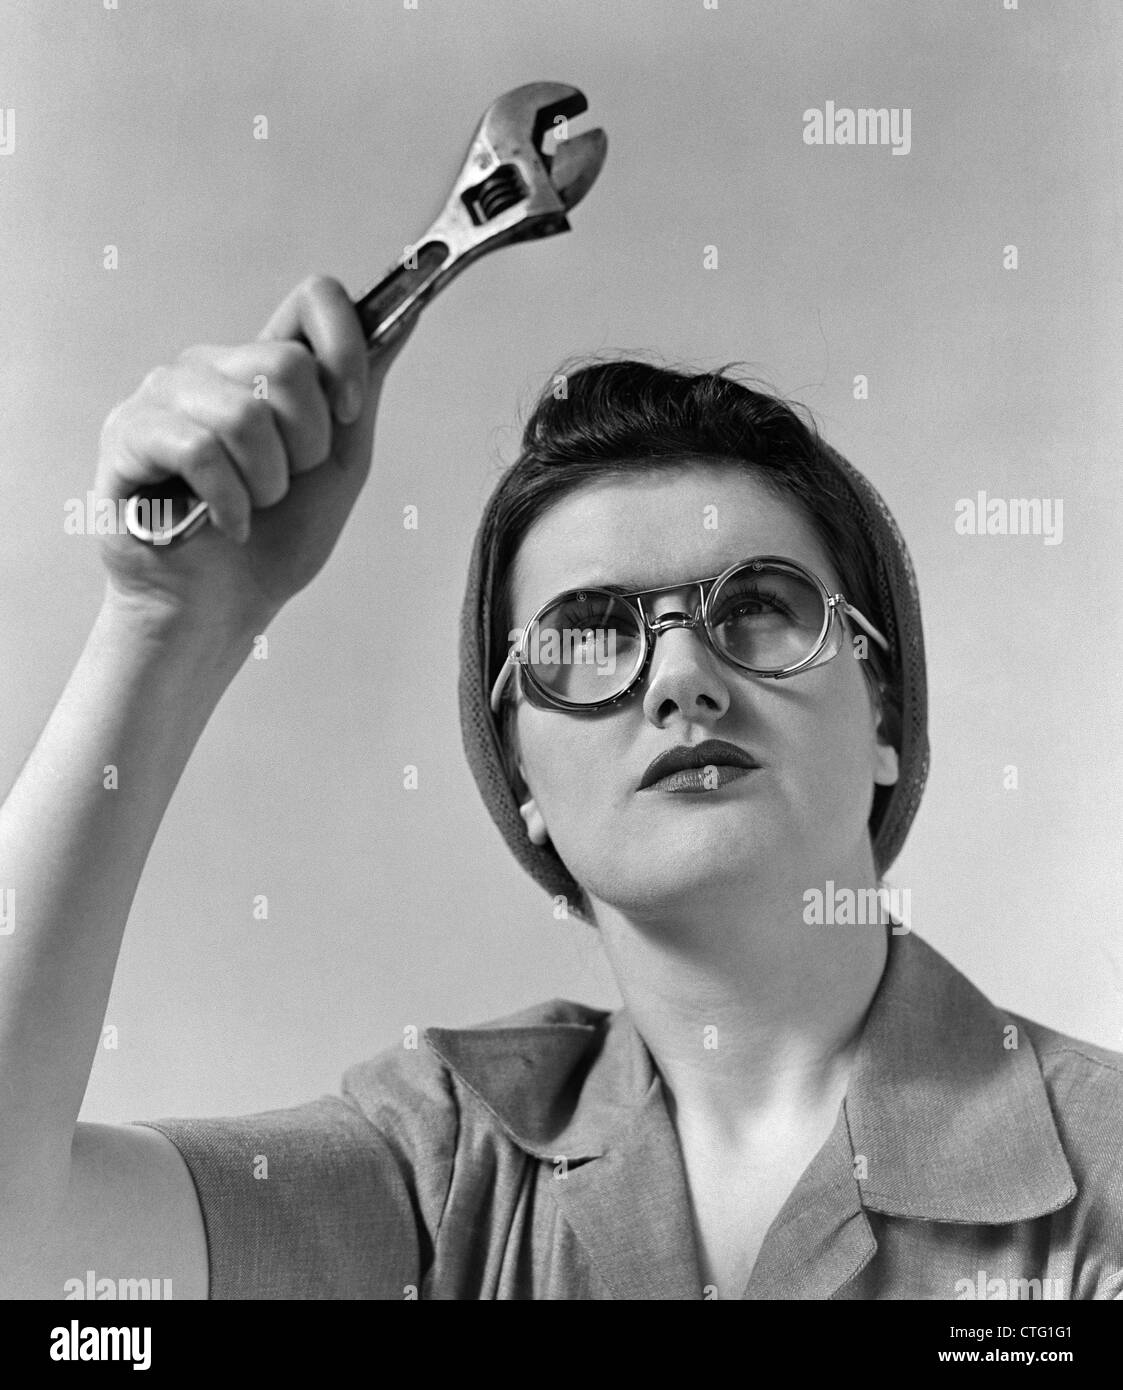 1940s ROSIE THE RIVETER WEARING SAFETY GLASSES HOLDING UP MONKEY WRENCH Stock Photo